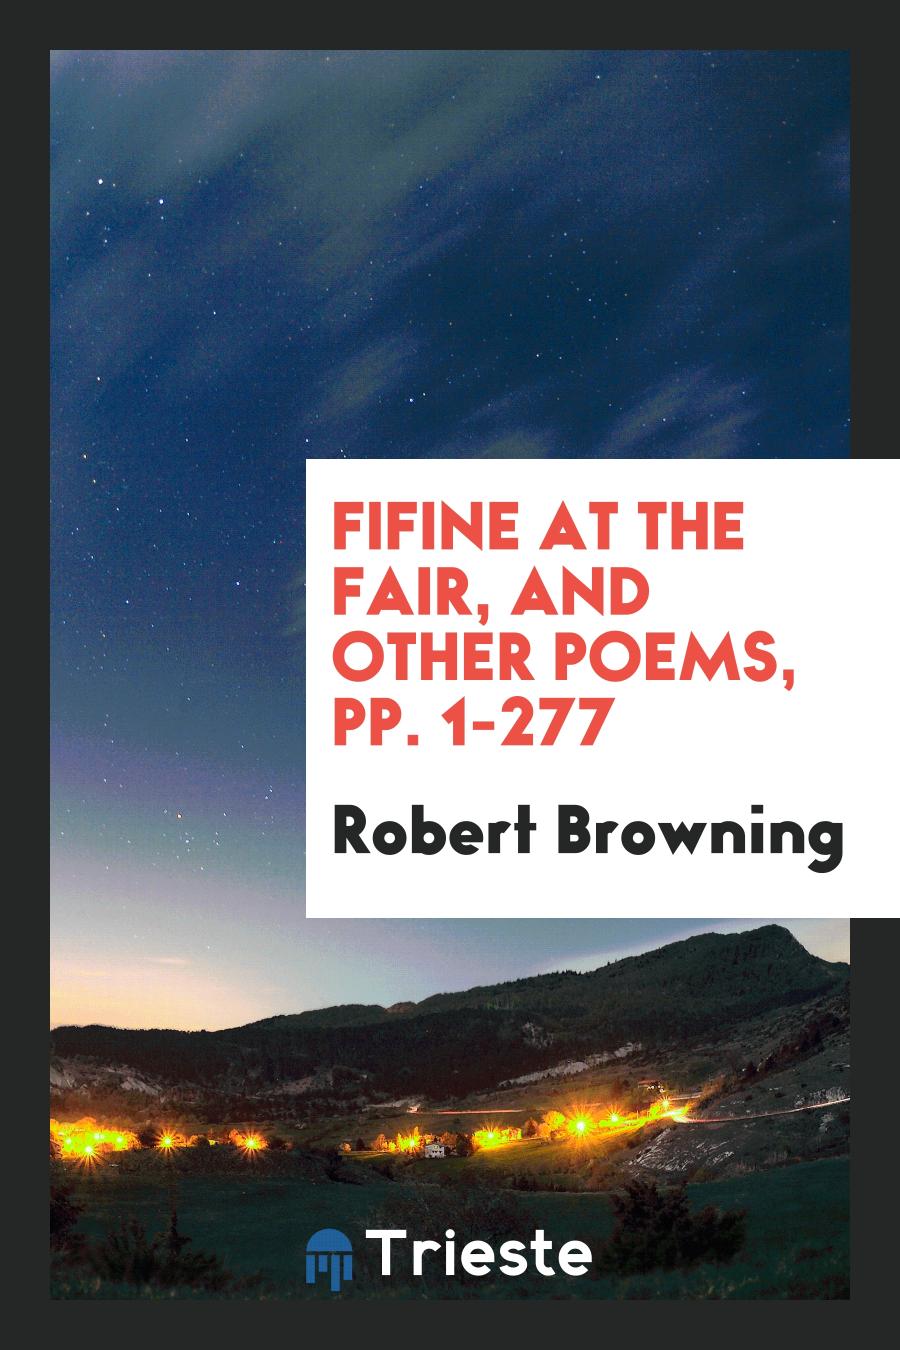 Fifine at the Fair, and Other Poems, pp. 1-277